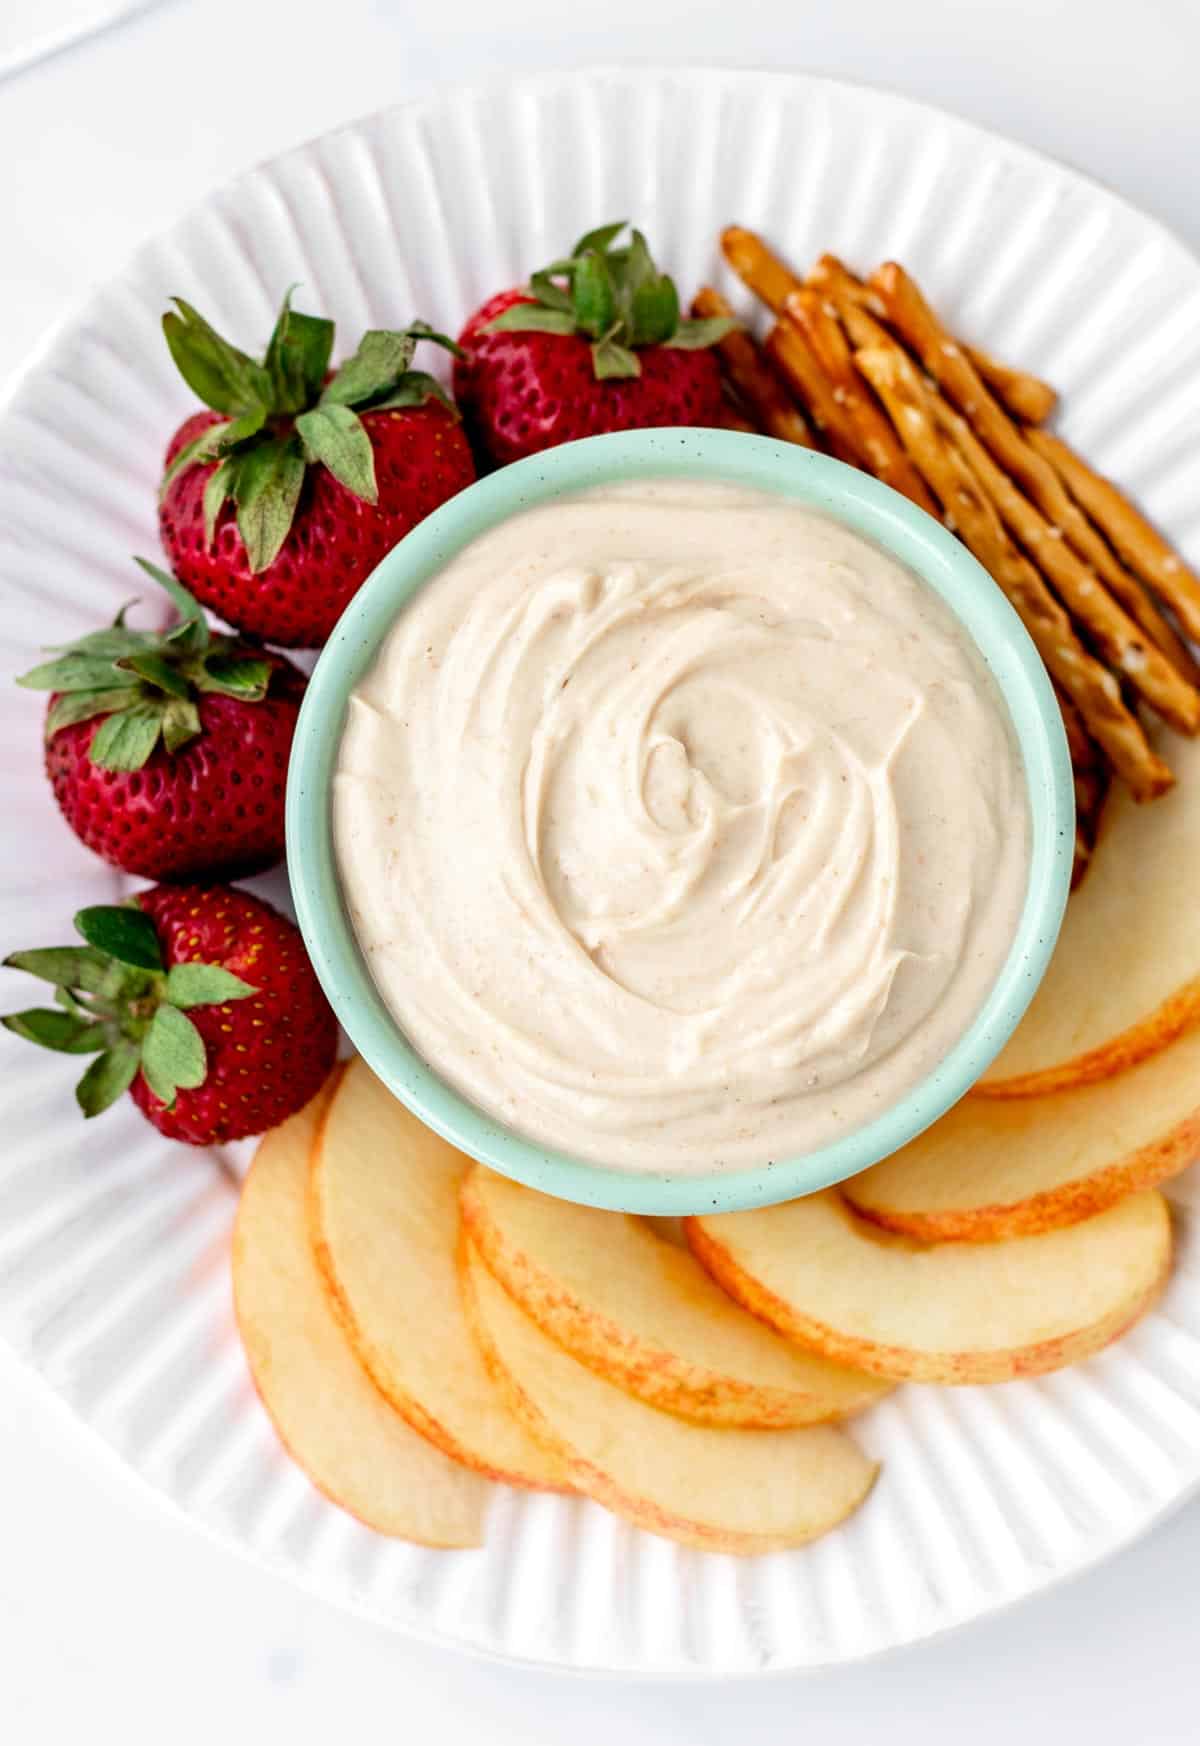 A close up image of healthy peanut butter dip with fruit and pretzels.